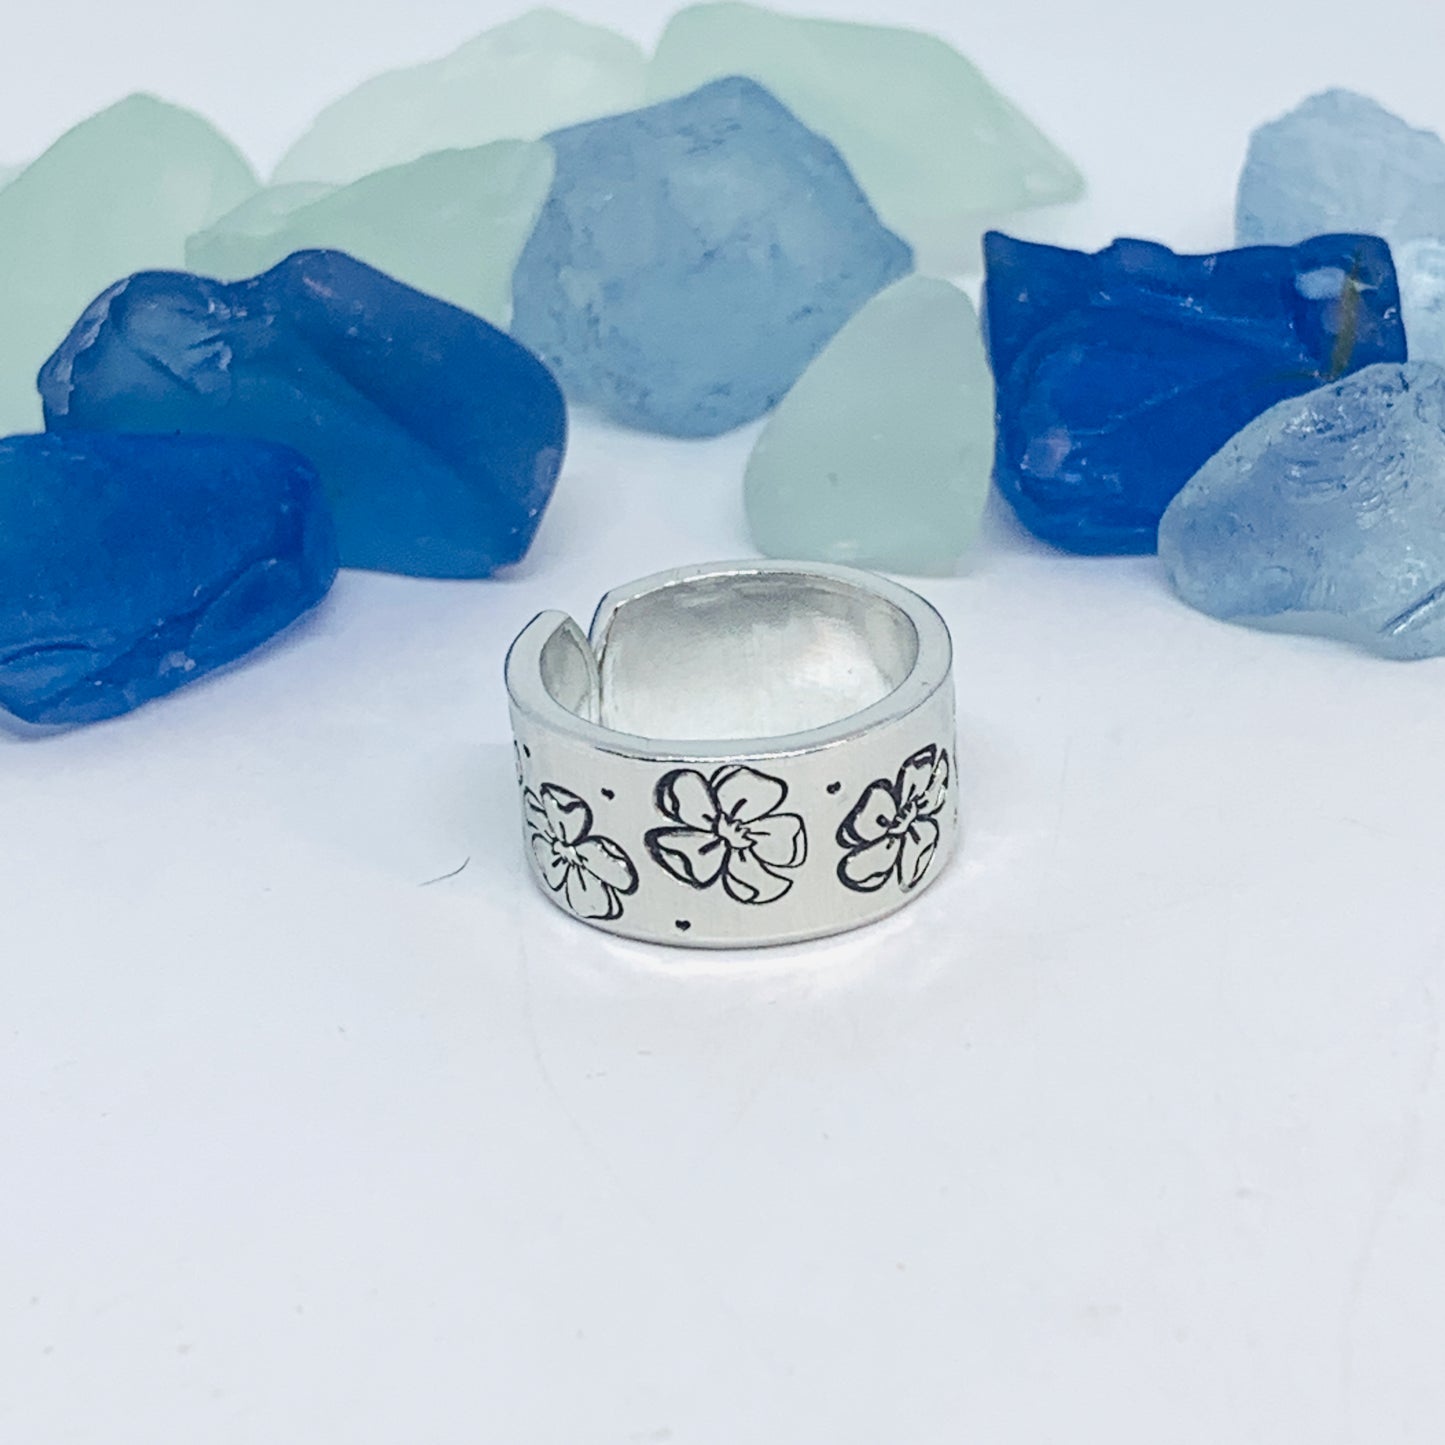 Cosmos Flowers Hand Stamped Ring | October Birth Flower Ring | Stamped Metal Cuff Ring | Adjustable Ring with Flowers | Gift for Her